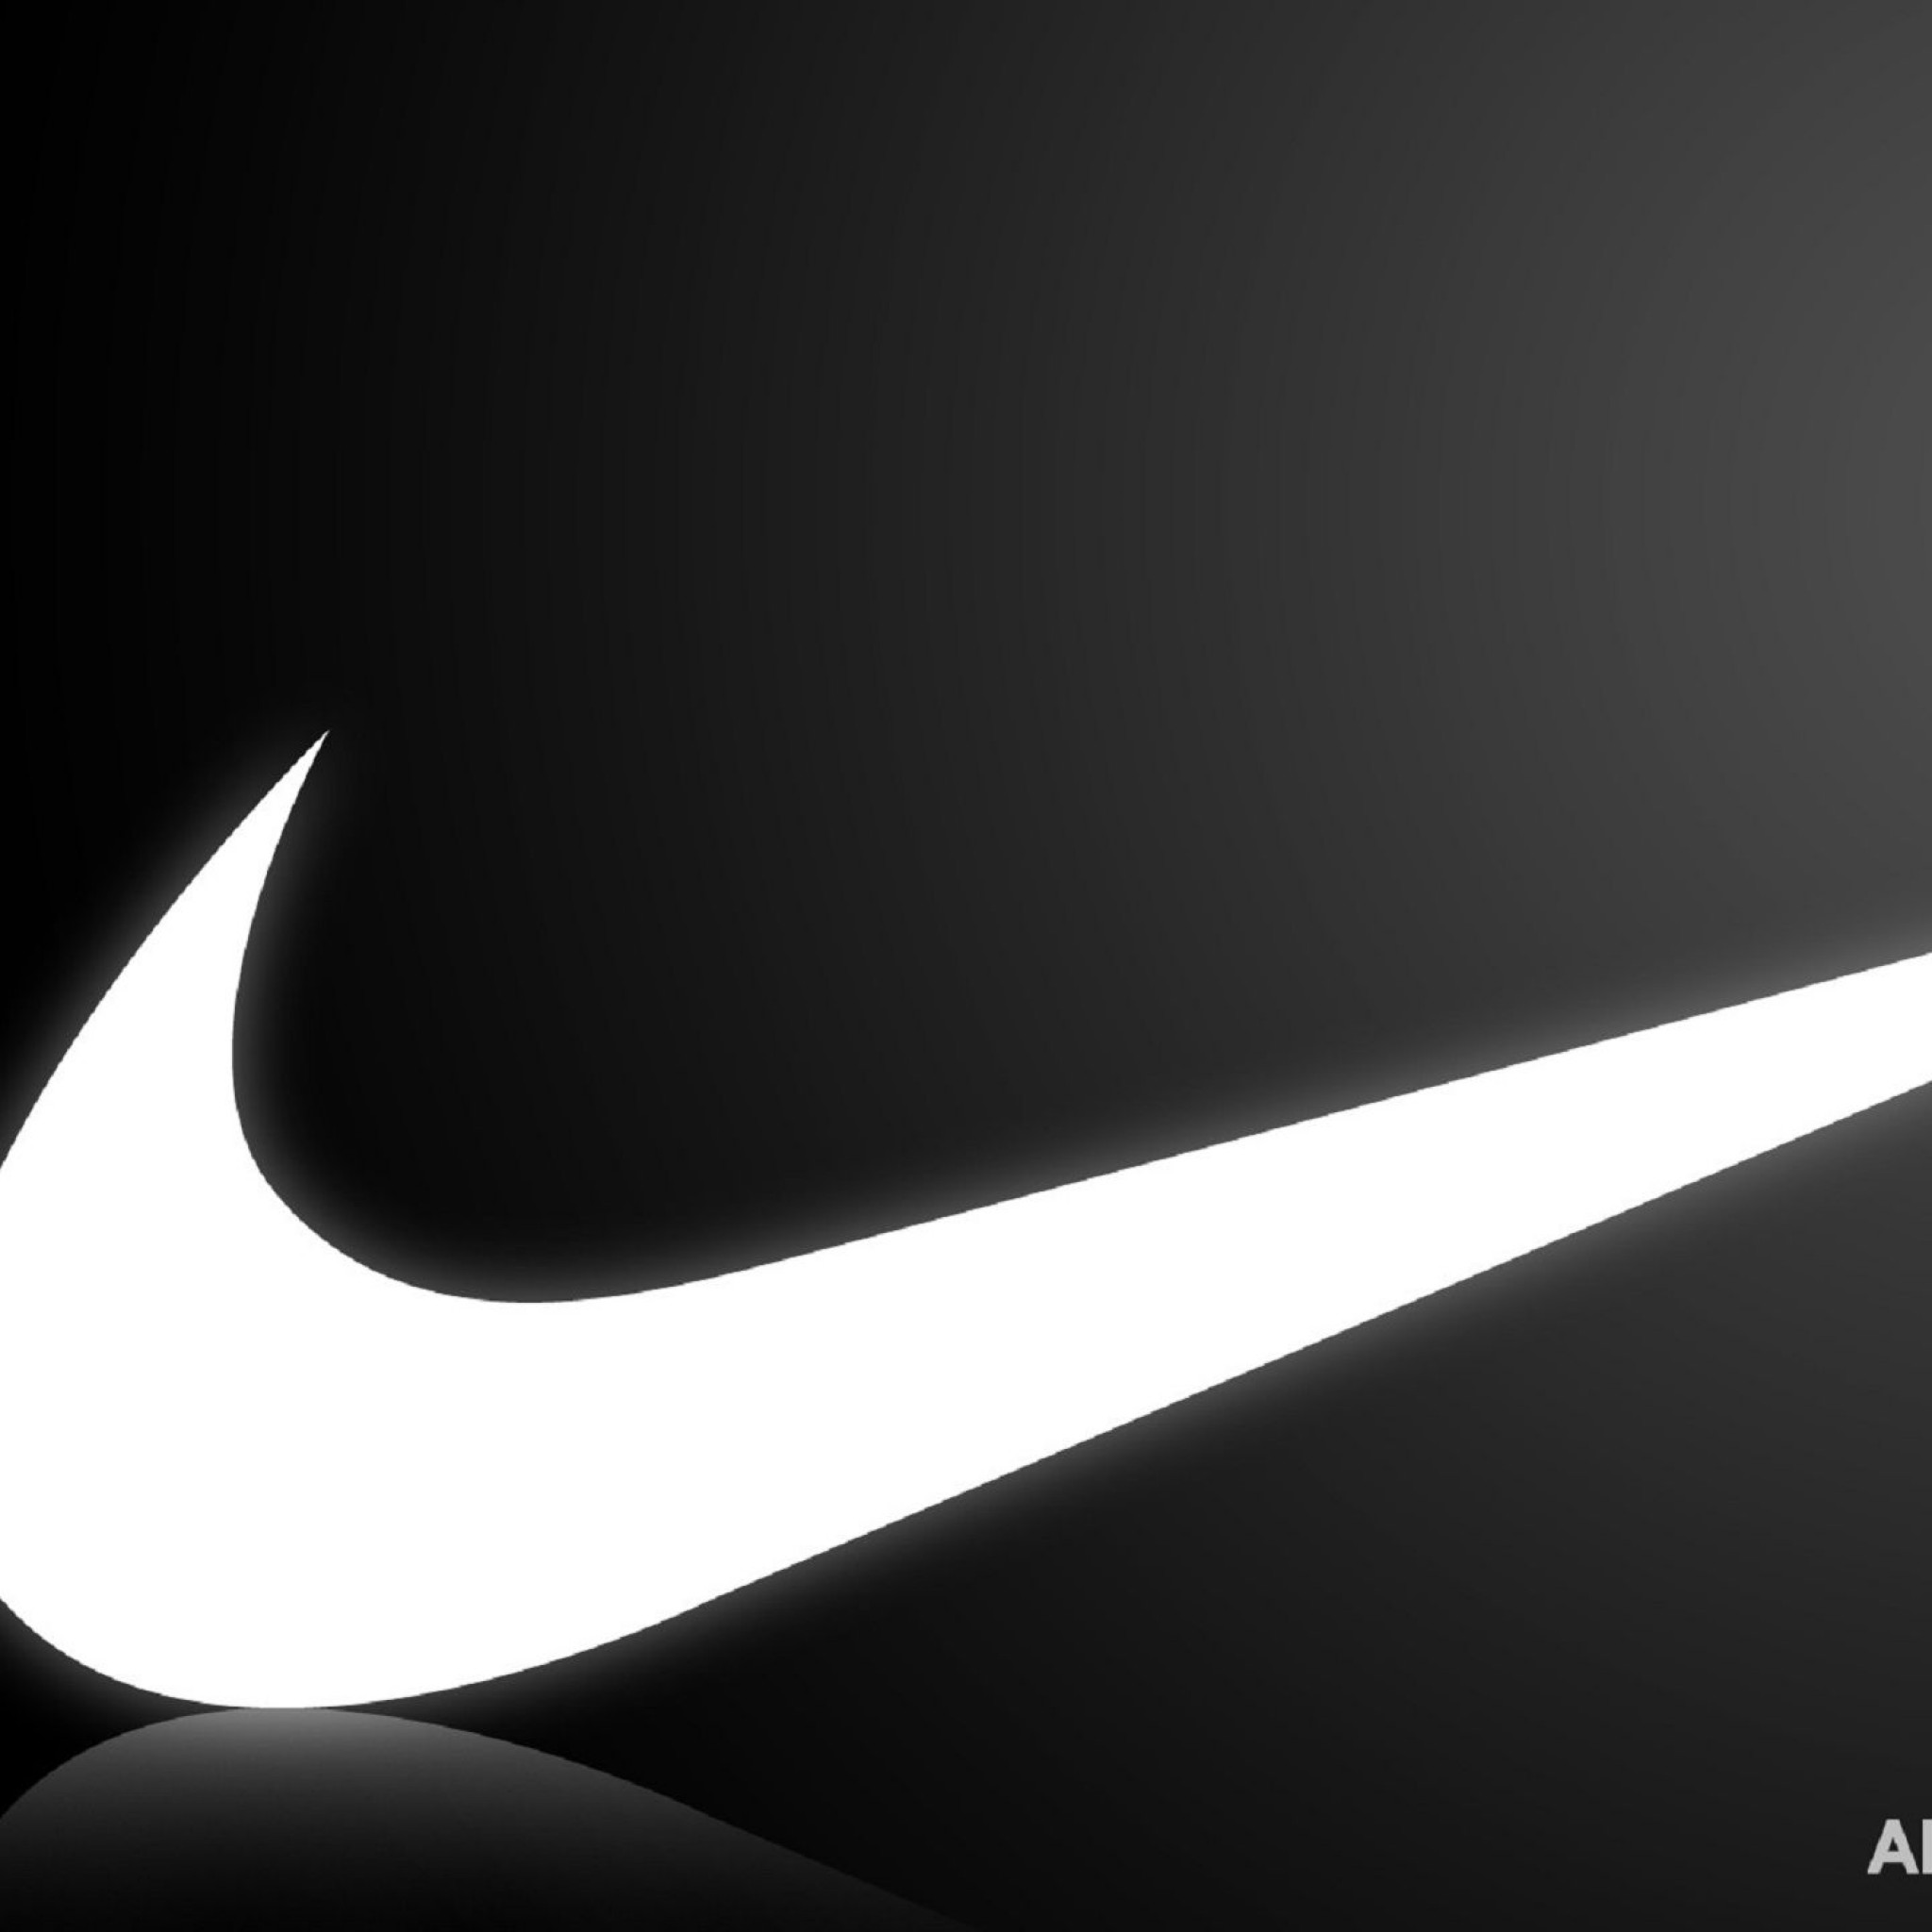 Free Download Nike Iphone Wallpapers Ipad Wallpaper Gallery 48x48 For Your Desktop Mobile Tablet Explore 47 Nike Wallpaper Iphone 6 Nike Sb Wallpapers White Nike Wallpaper Nike Money Wallpaper